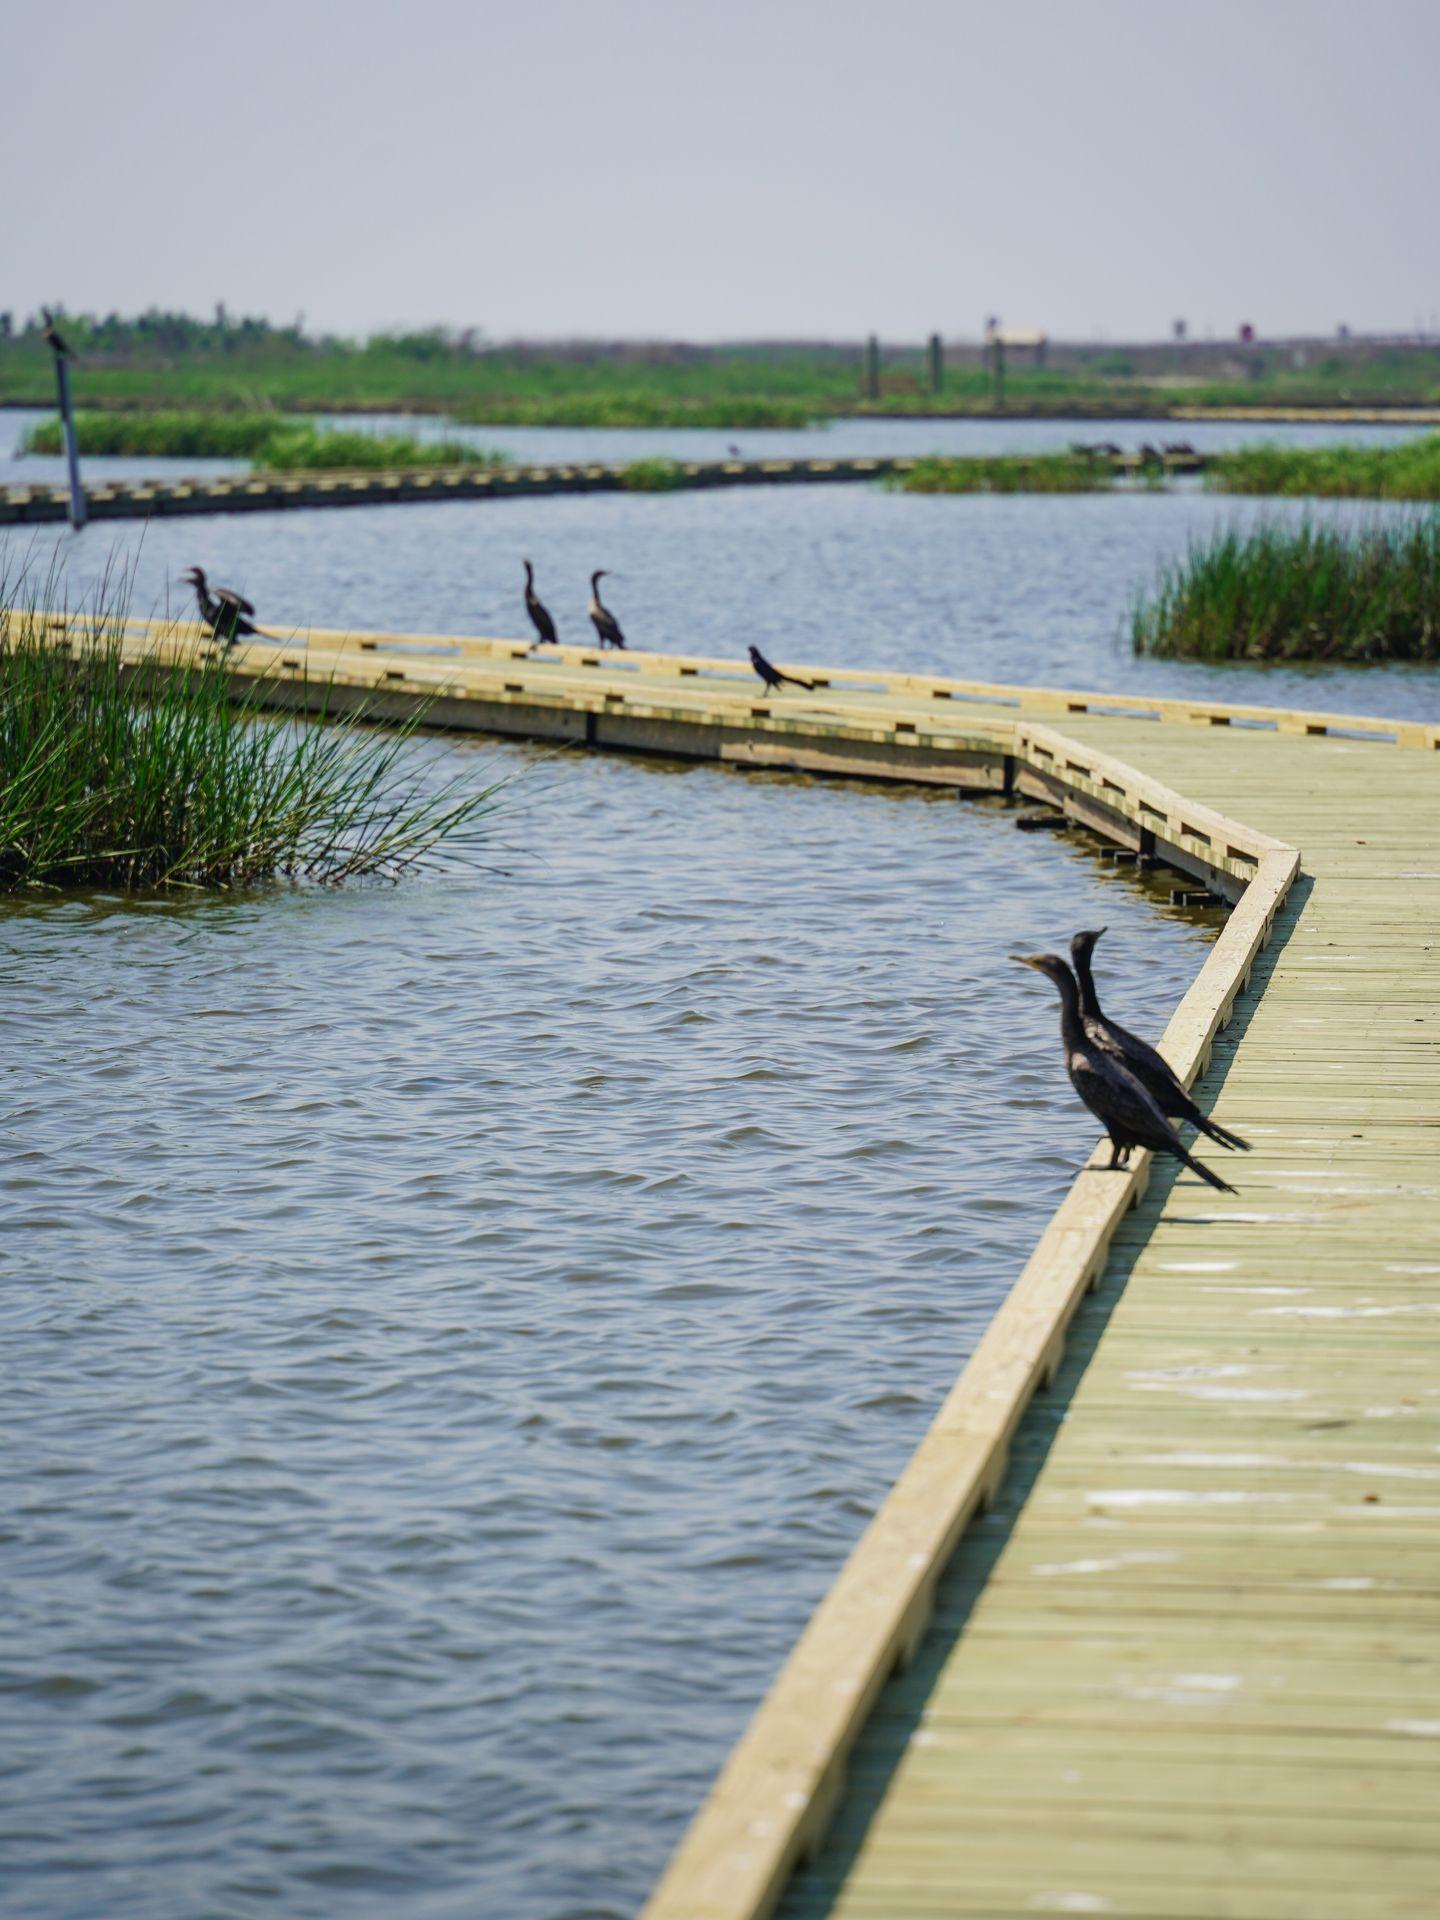 A boardwalk trail with several birds standing along the edge.